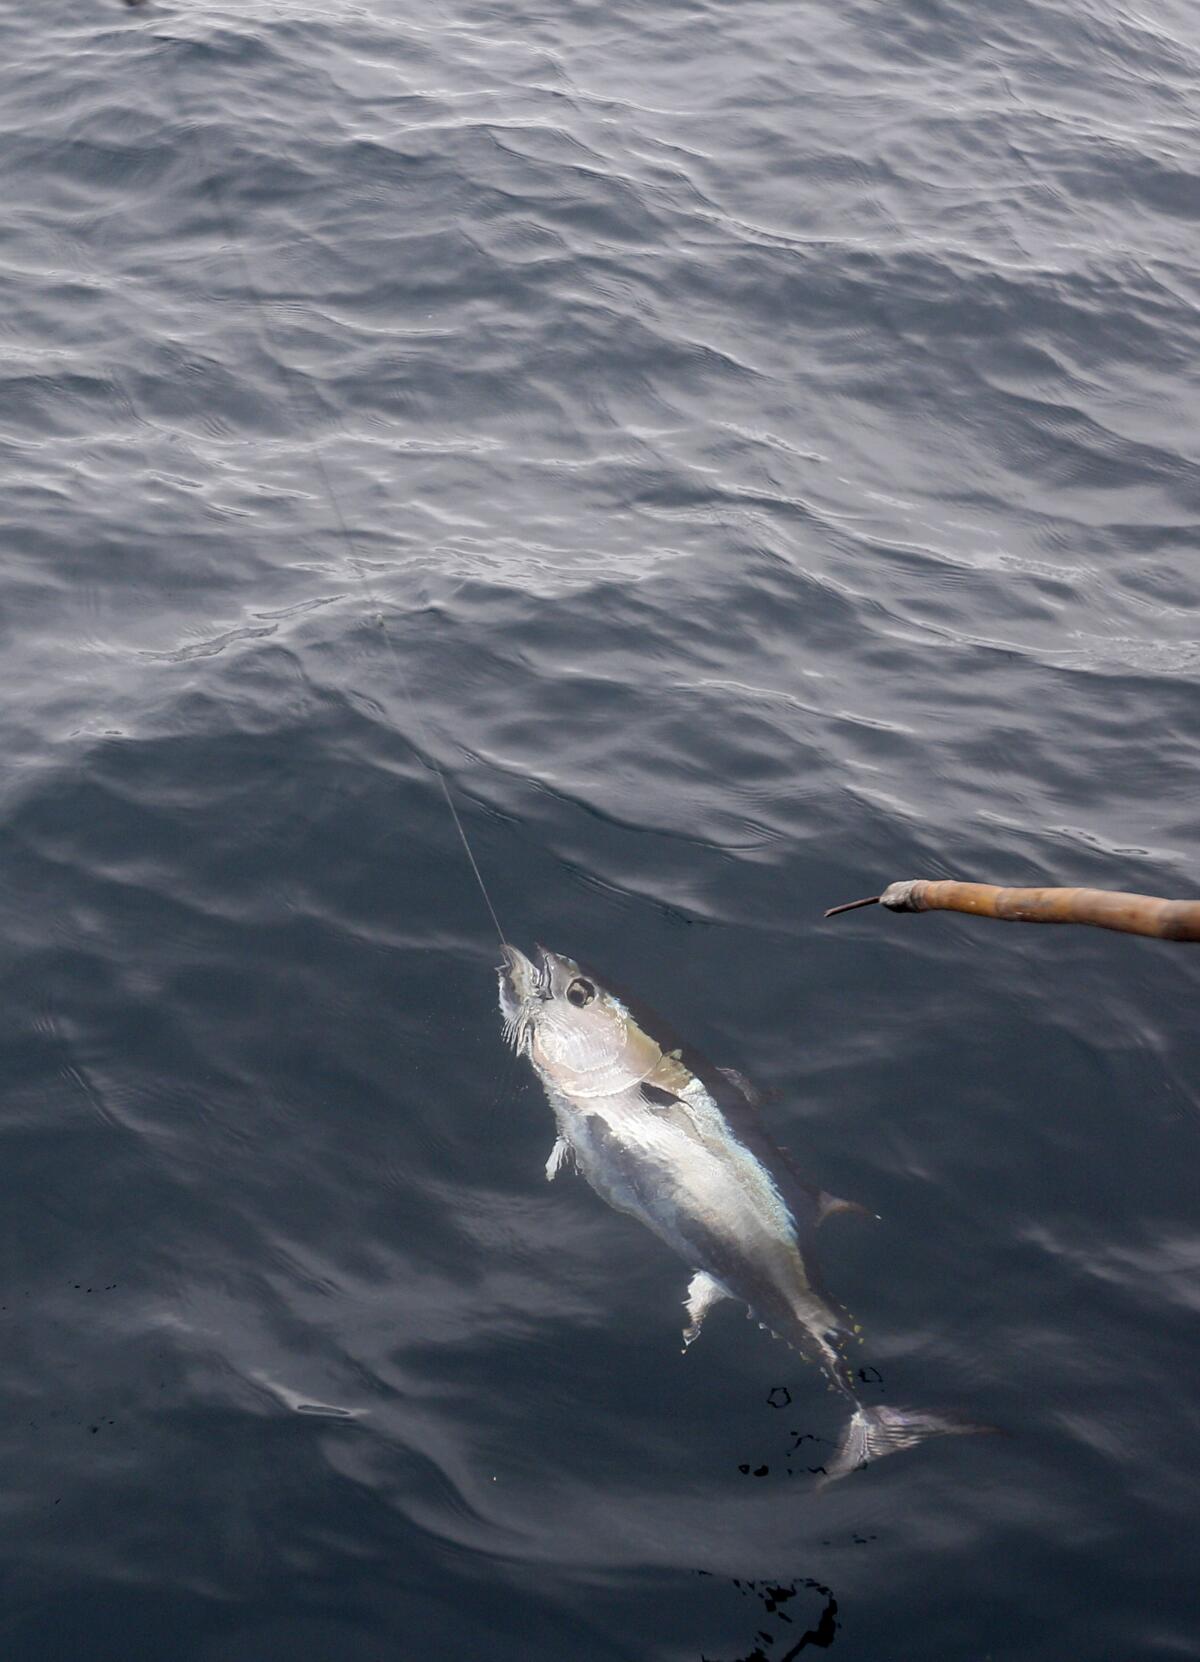 A bluefin tuna was caught southwest of Newport Beach in the Pacific Ocean on Wednesday, Aug. 18, 2021.